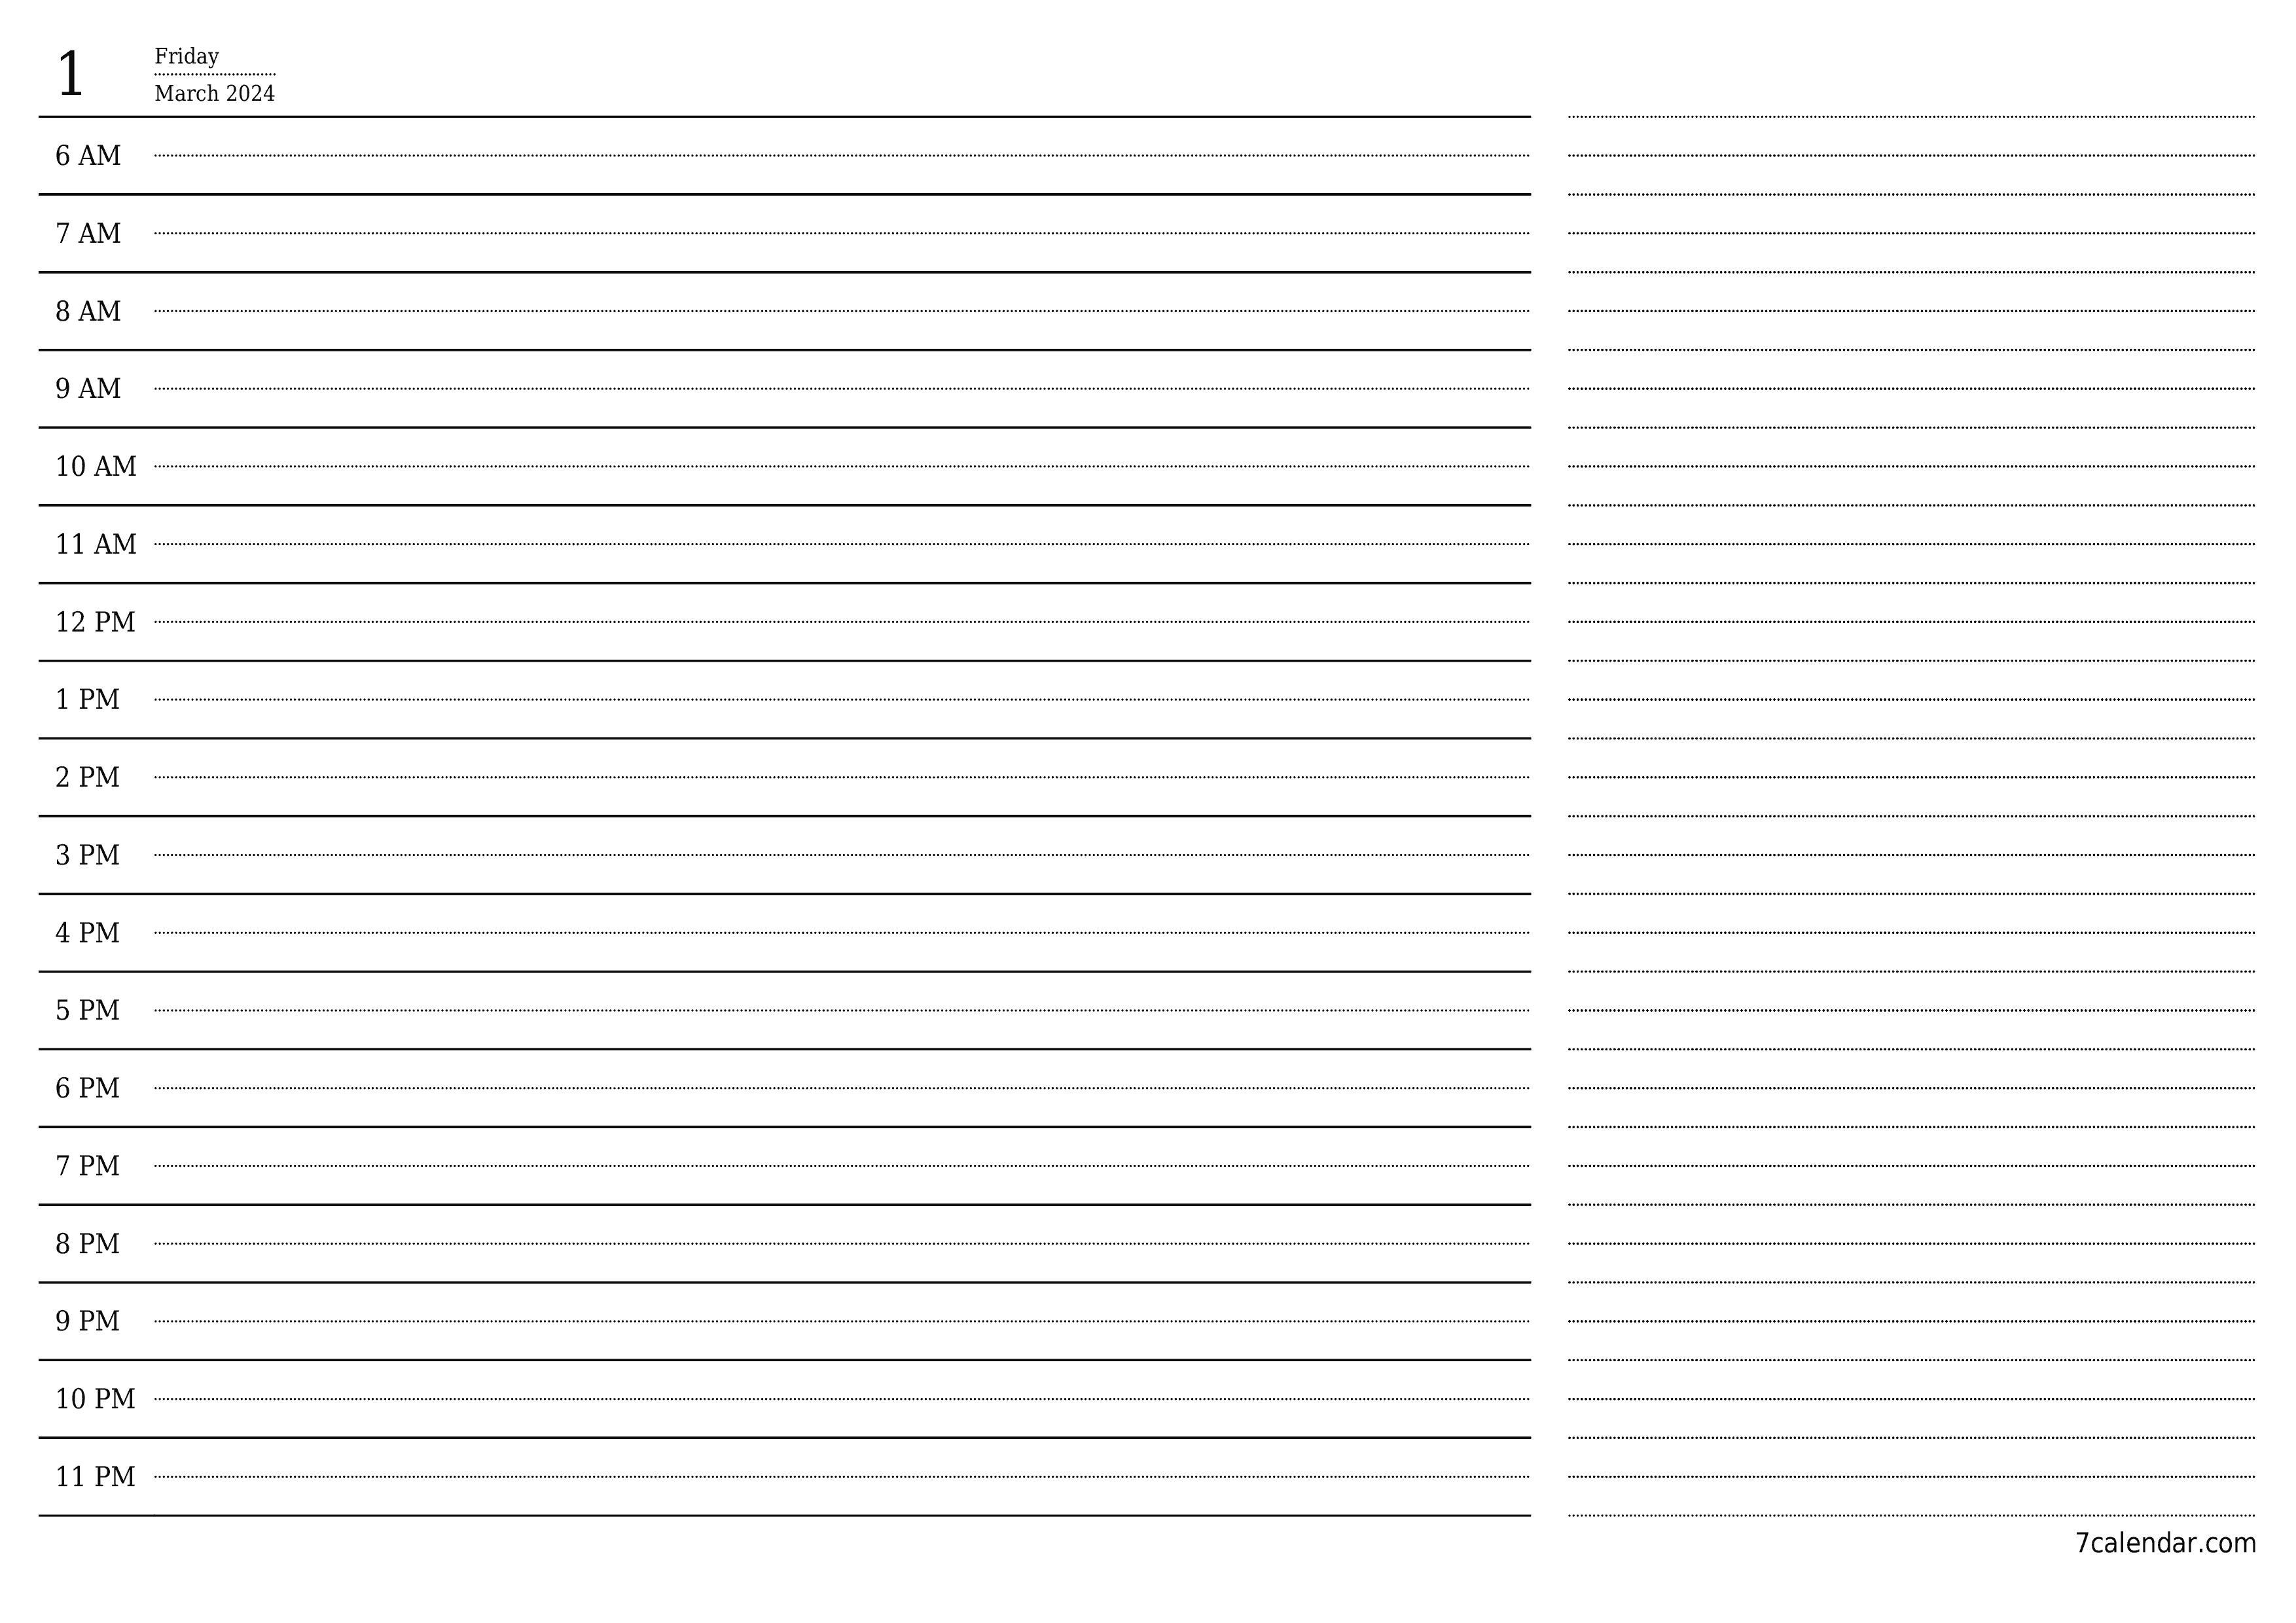 Blank daily printable calendar and planner for day March 2024 with notes, save and print to PDF PNG English